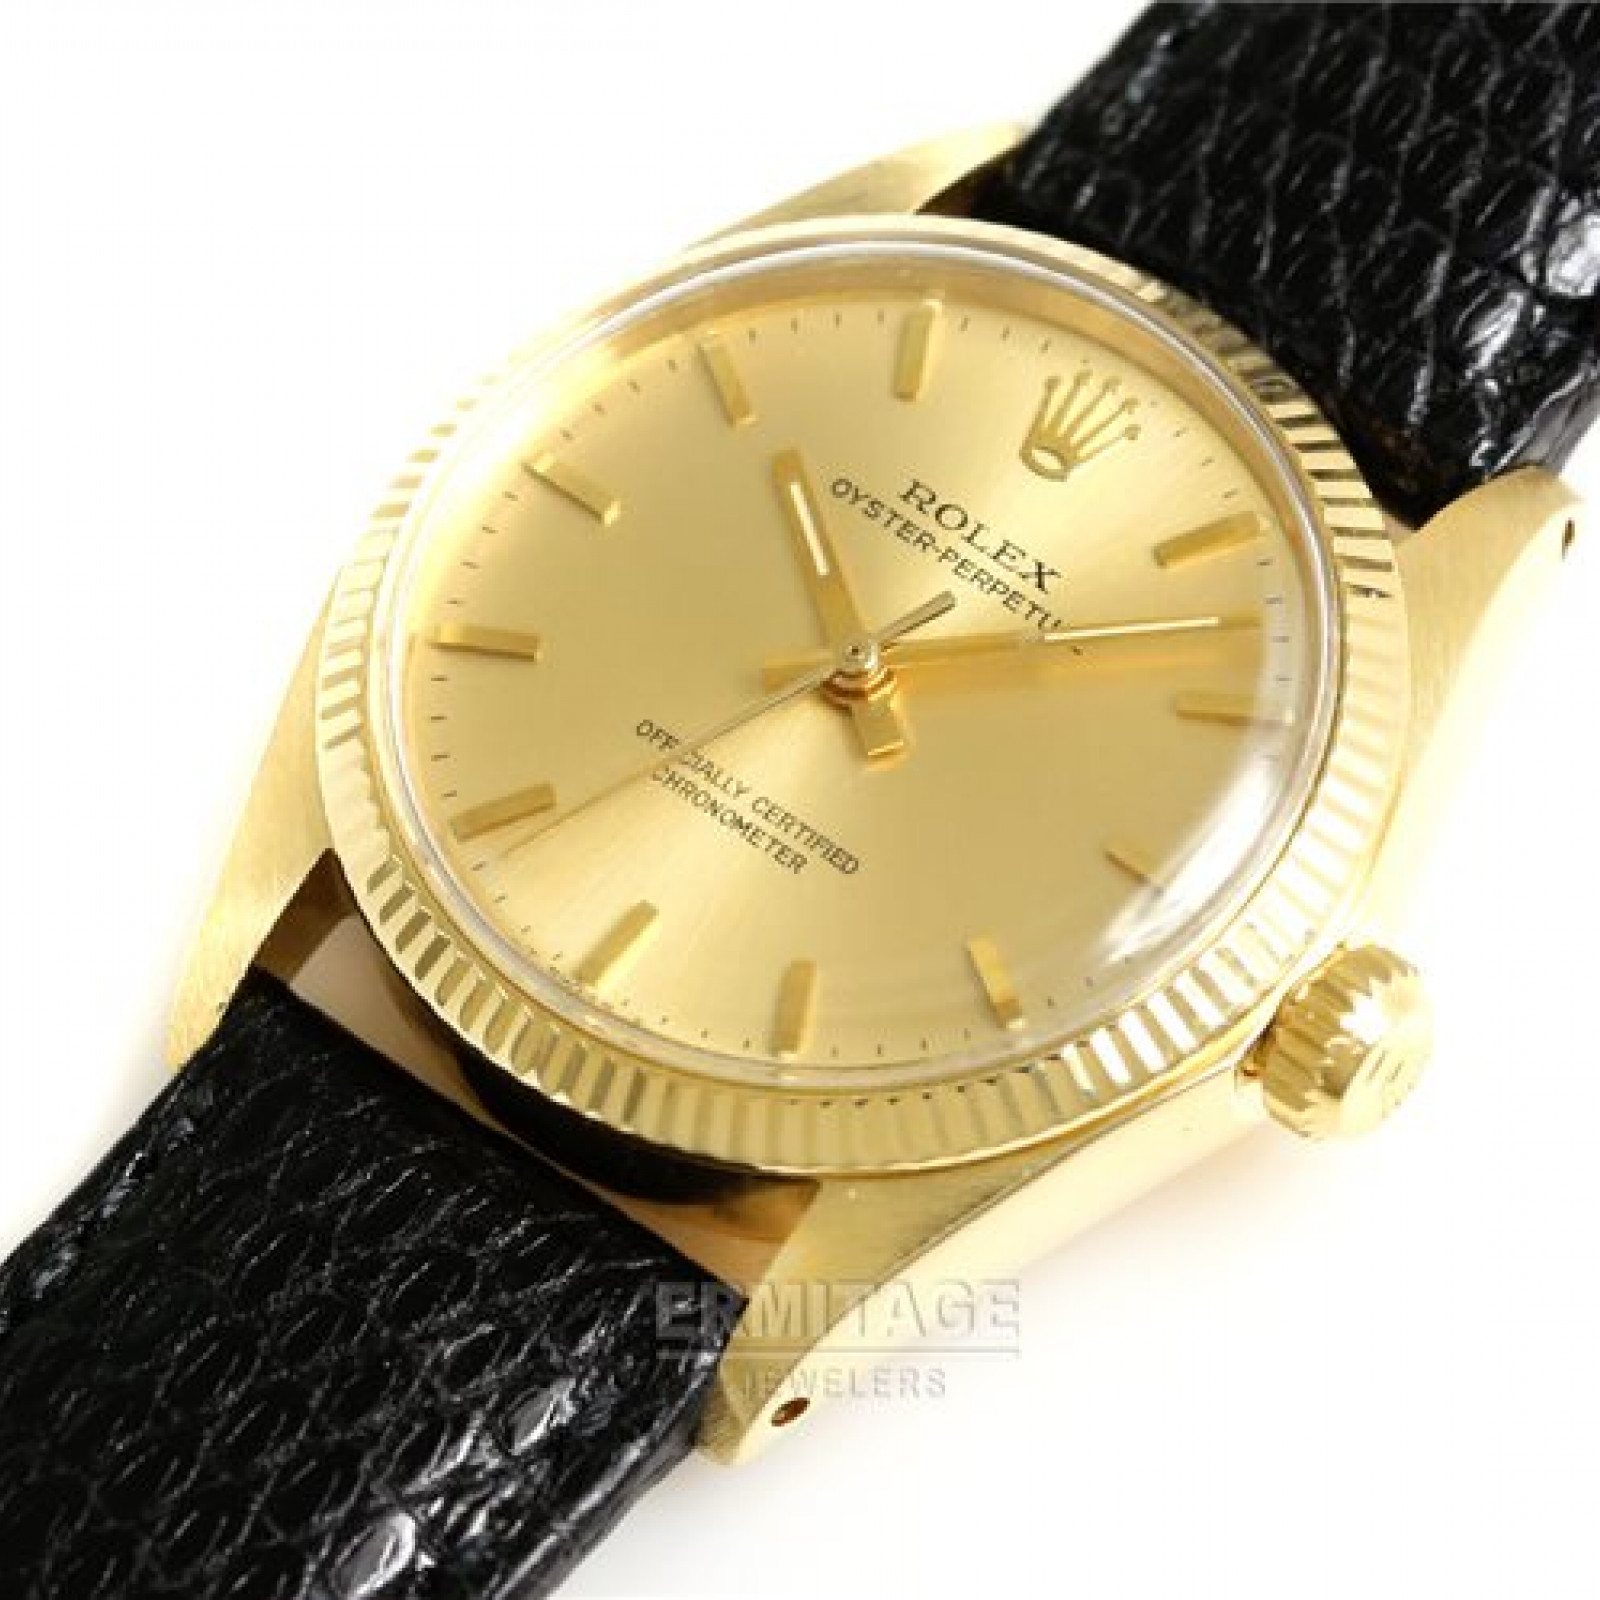 Vintage Rolex Oyster Perpetual 6551 Gold